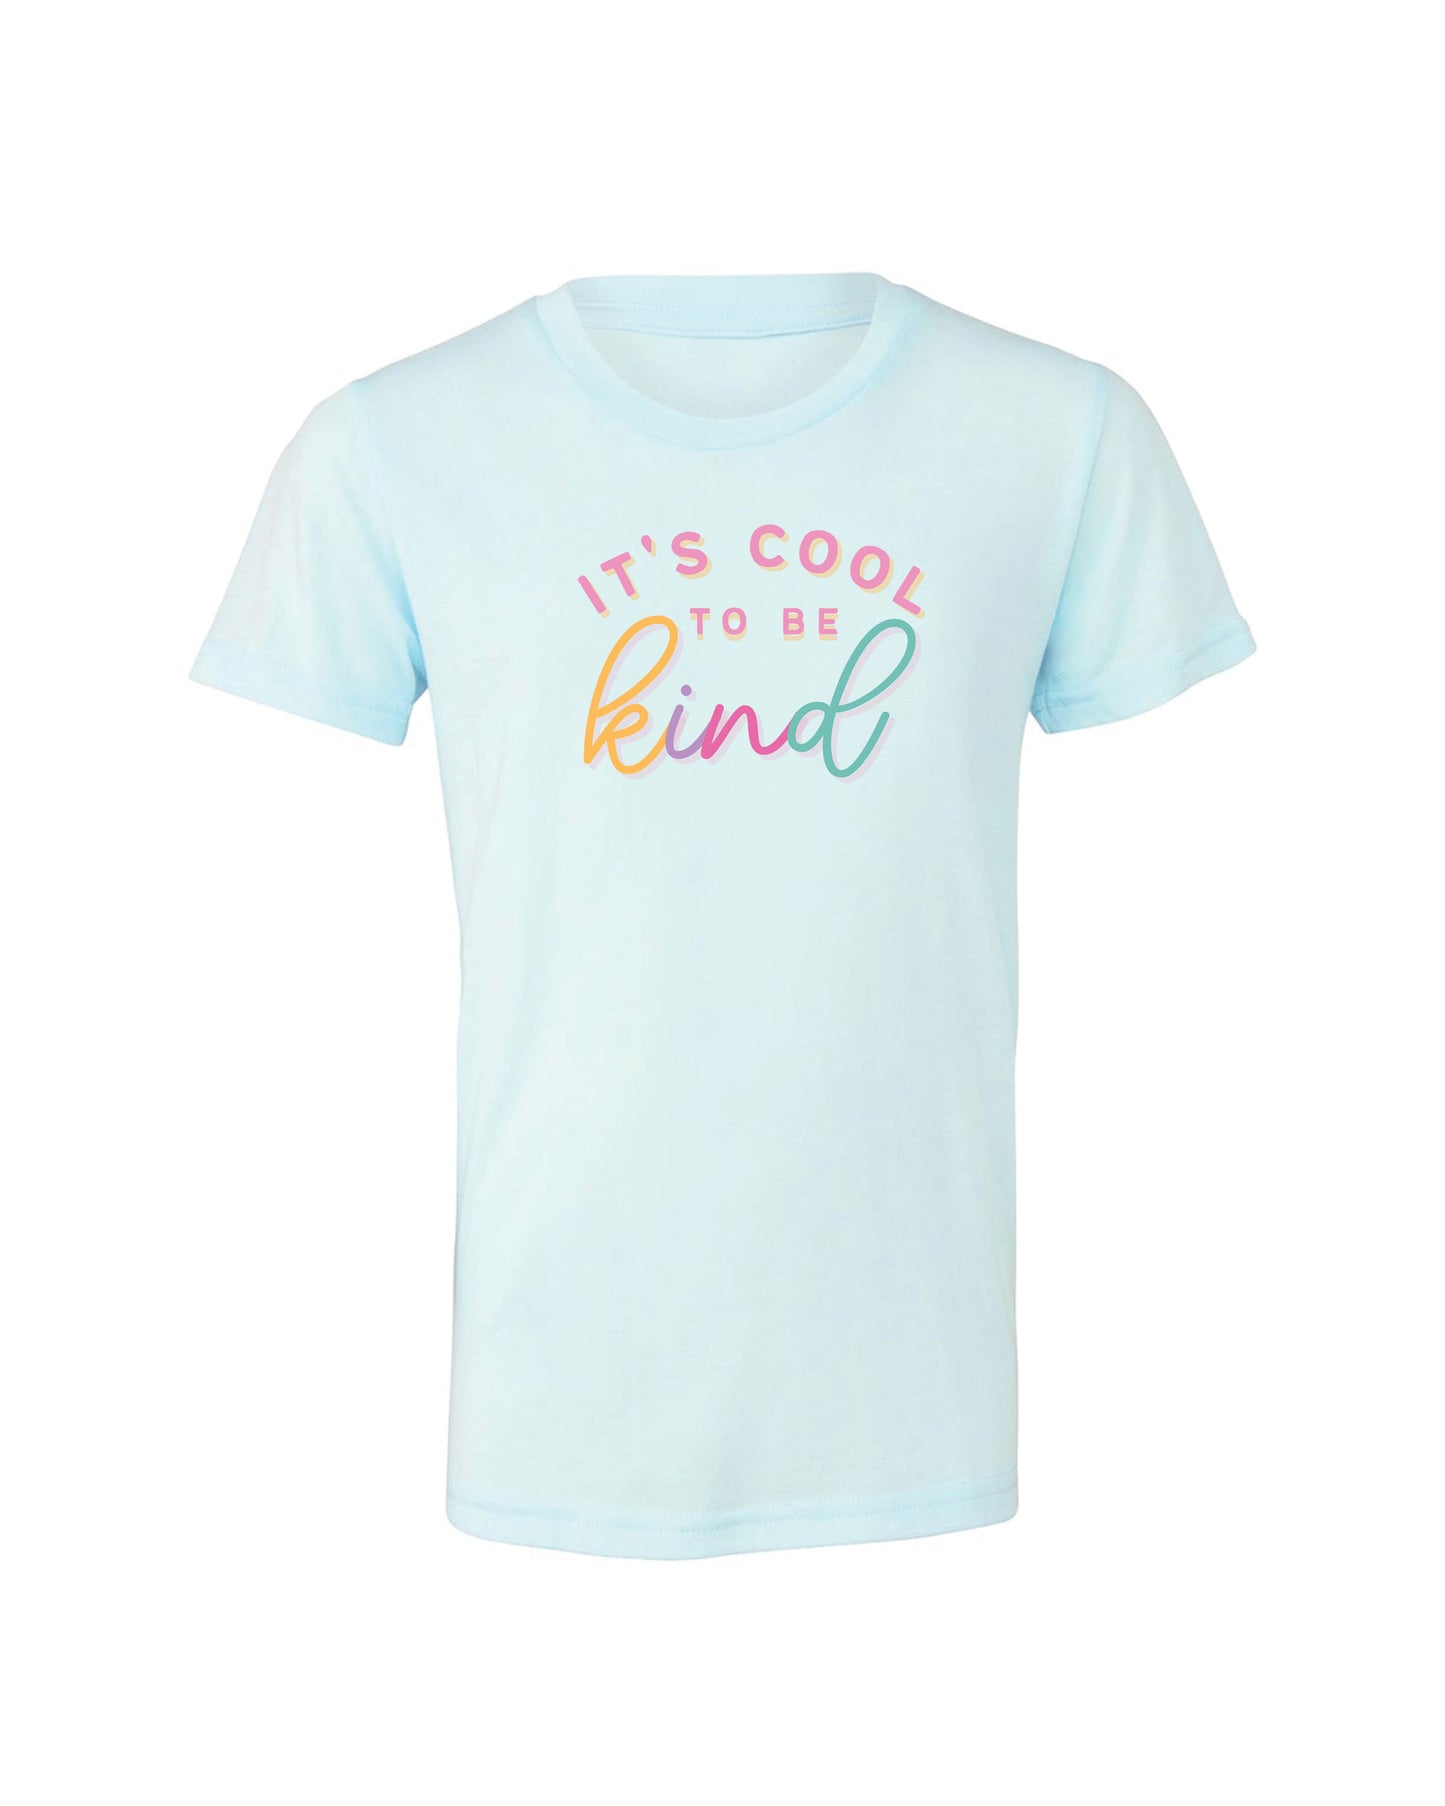 Cool to be Kind | Tee | Girls-Sister Shirts-Sister Shirts, Cute & Custom Tees for Mama & Littles in Trussville, Alabama.